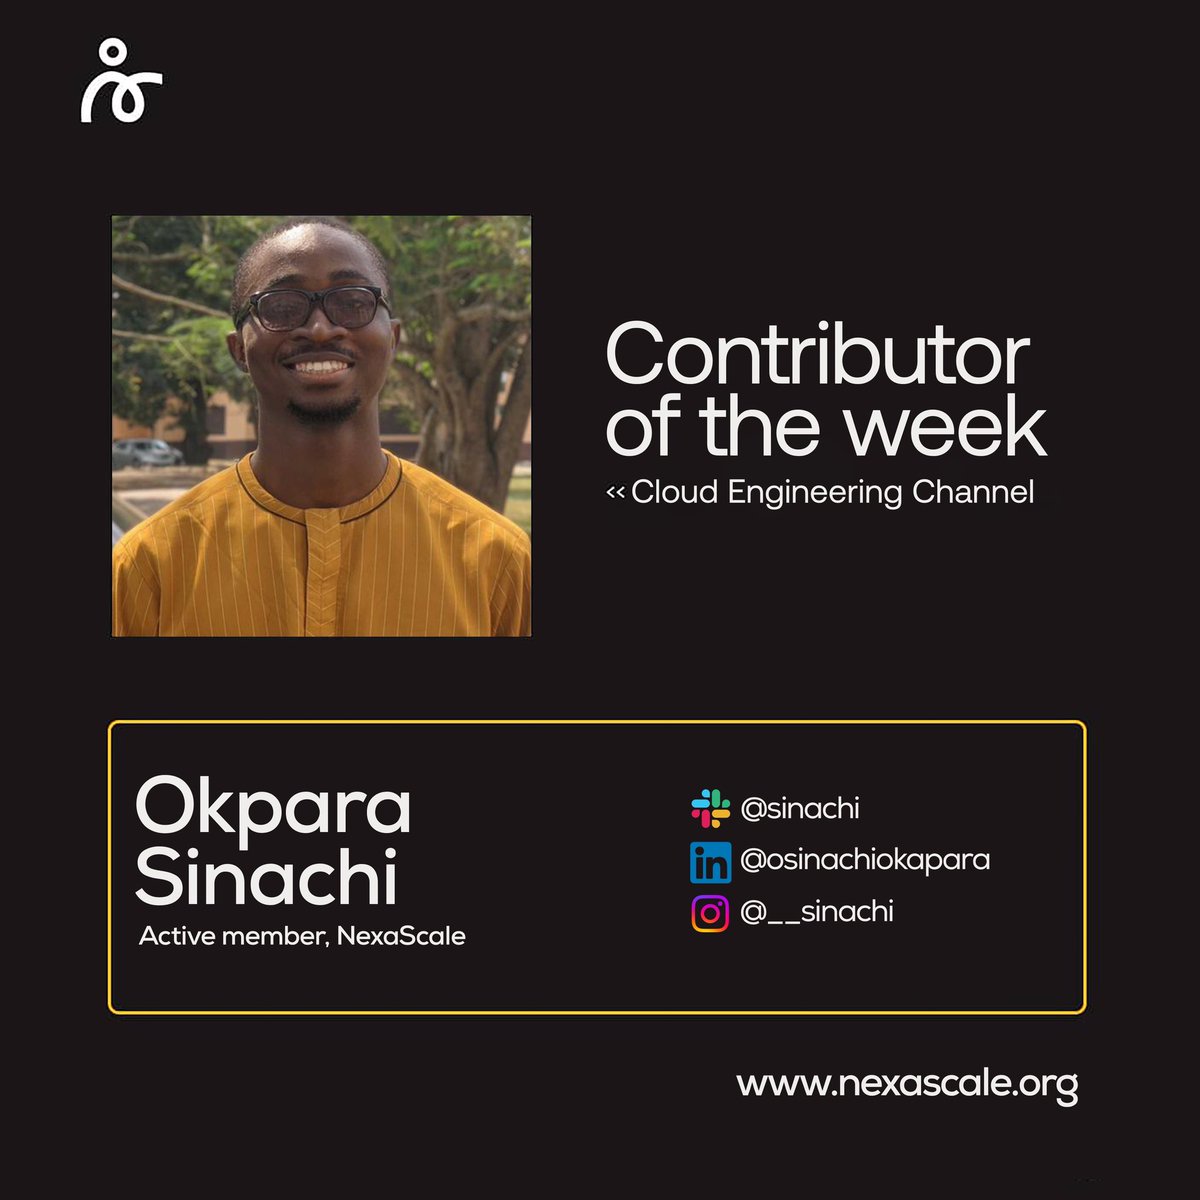 Congratulations to Okpara Sinachi for being the most engaging person on the NexaScale Cloud Engineering channel. He's been so engaging, knowledgeable, and always willing to lend his voice. He is a great role model for people in Tech, and we're lucky to have him in our community.